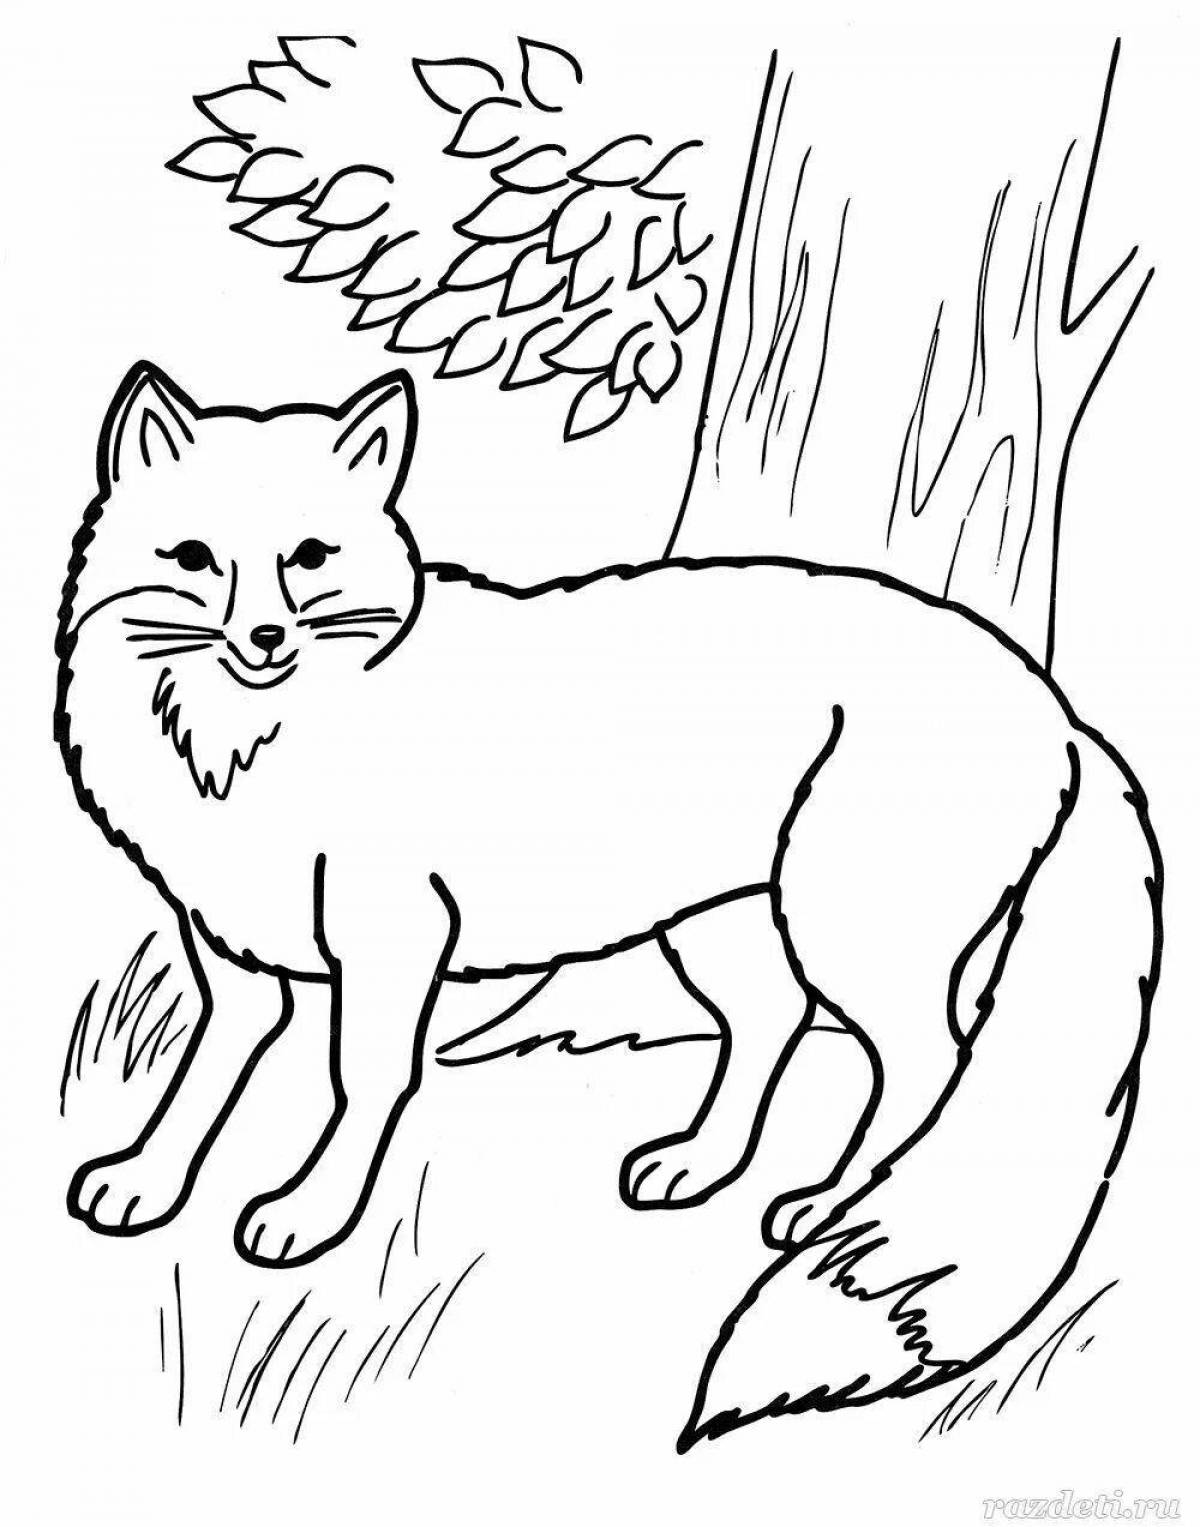 Glamorous forest animals coloring book for 6-7 year olds